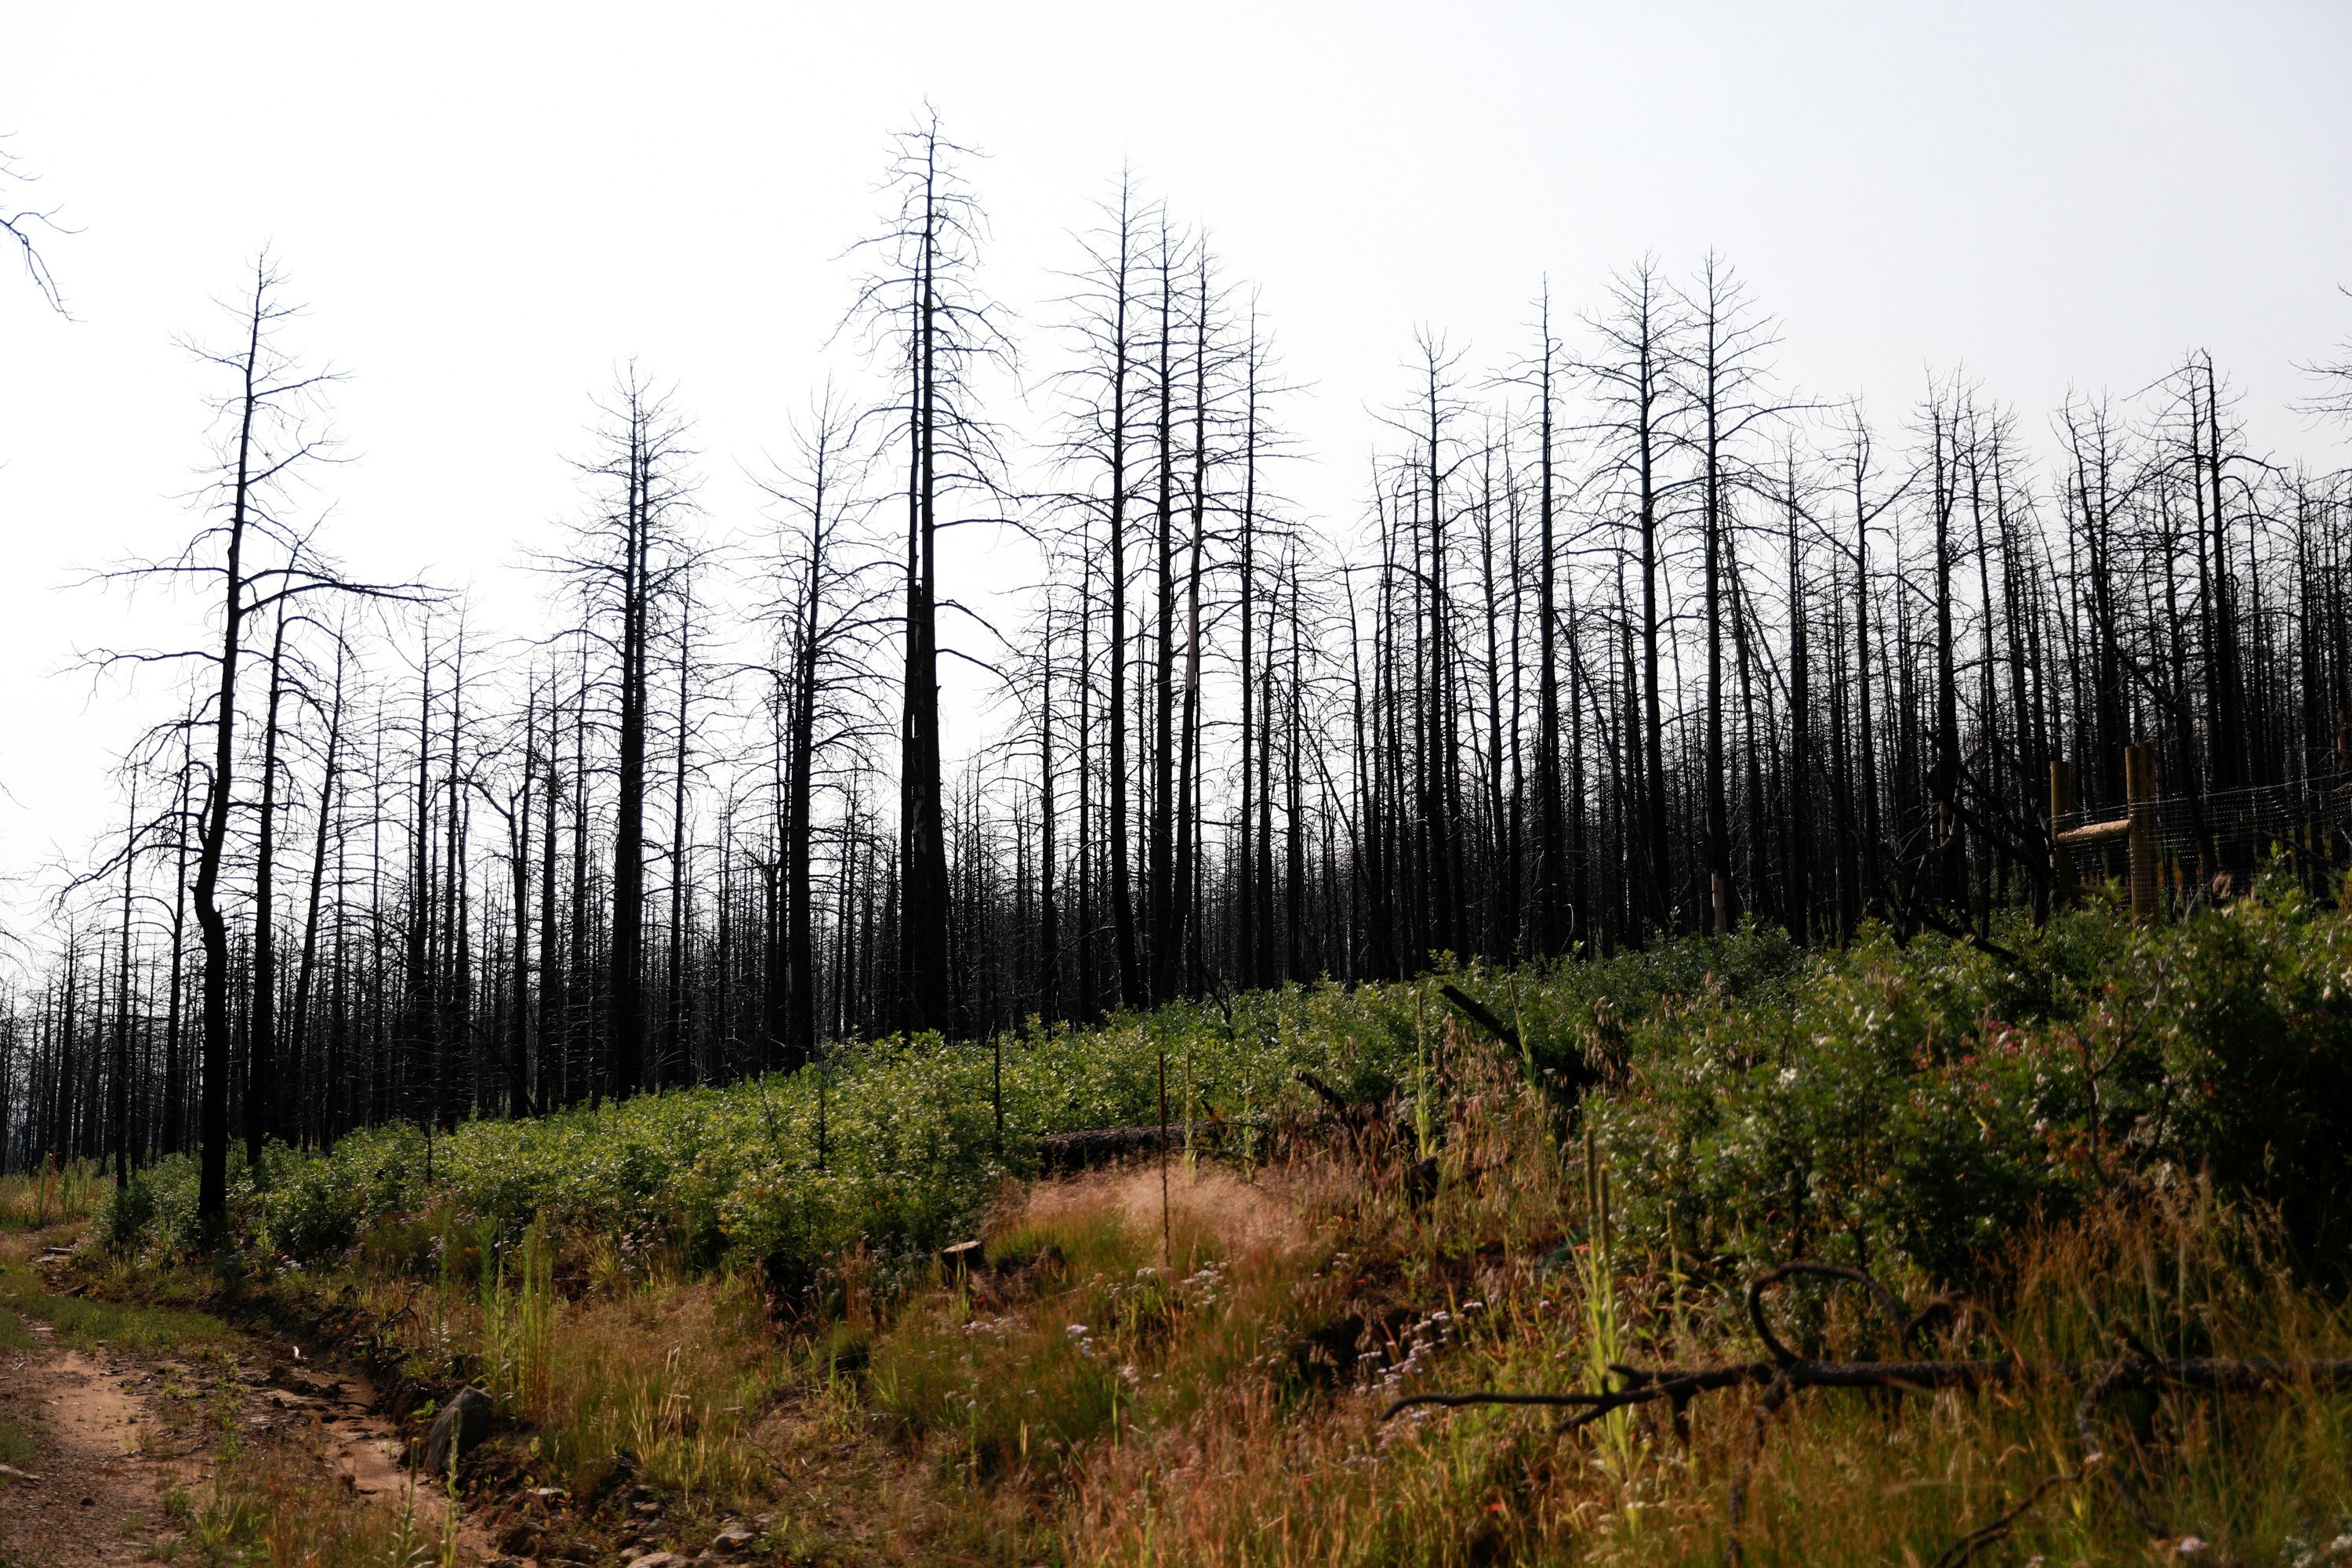 As fires devastate U.S. forests, researchers work to grow super-resilient saplings